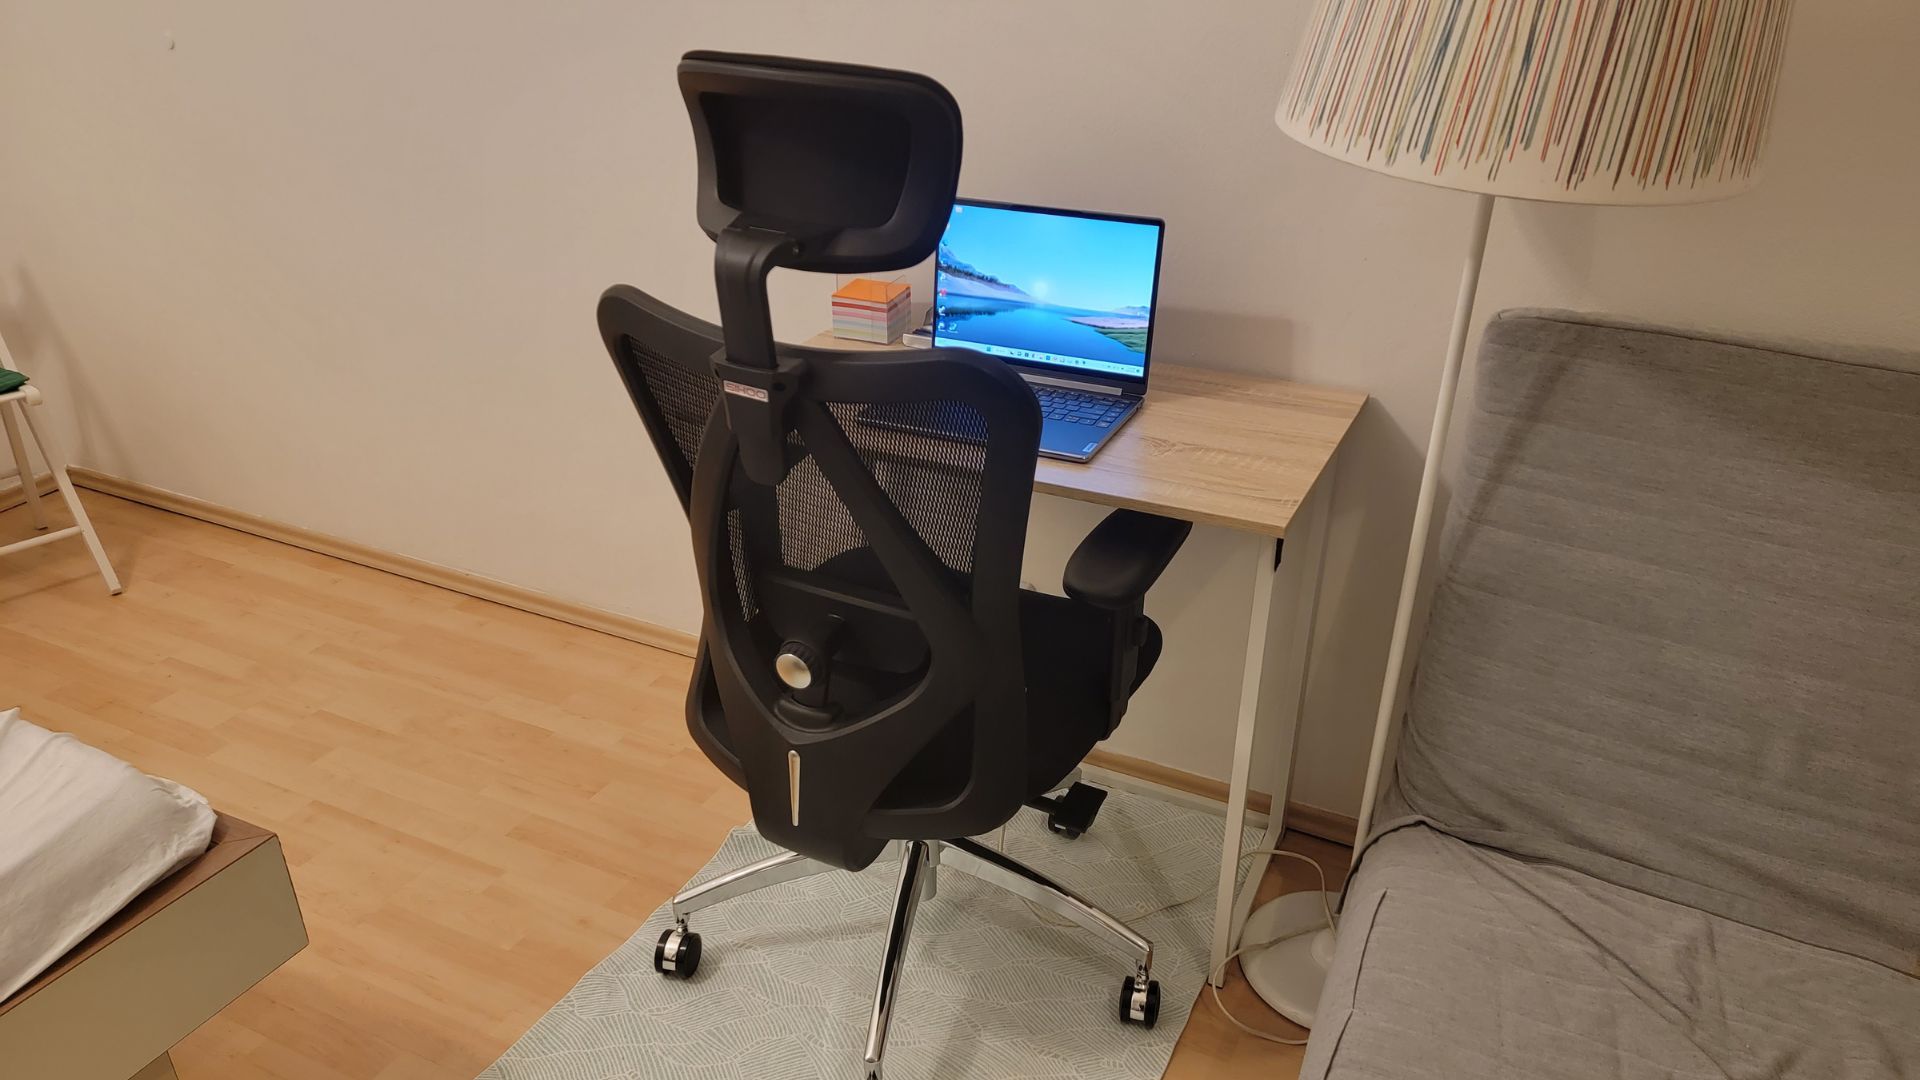 SIHOO M18 Ergonomic Chair review --- A great chair which is